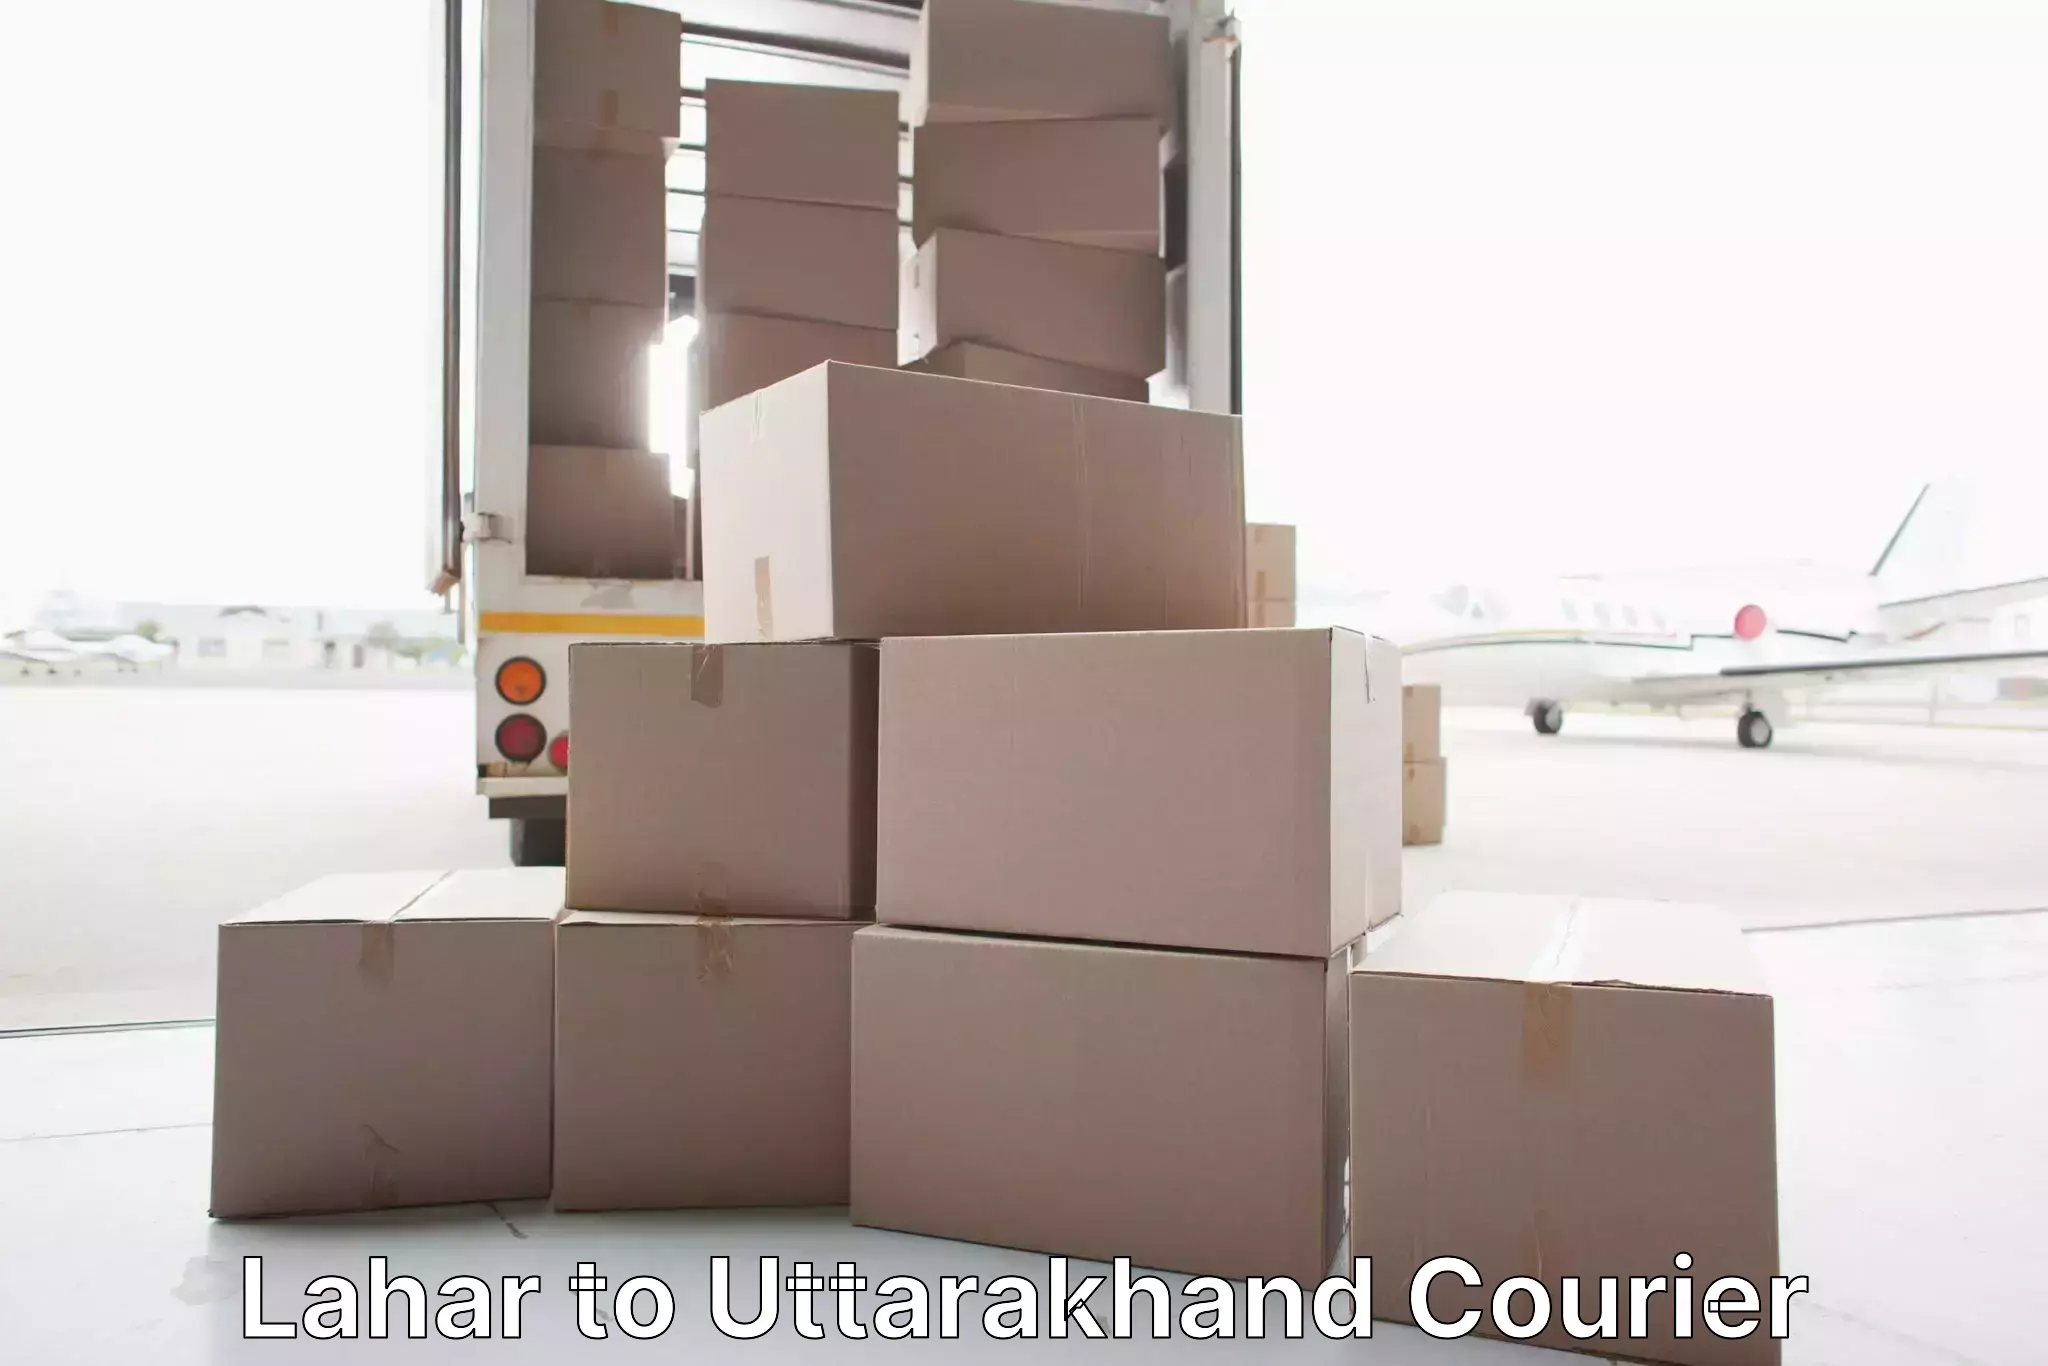 Furniture moving assistance Lahar to IIT Roorkee